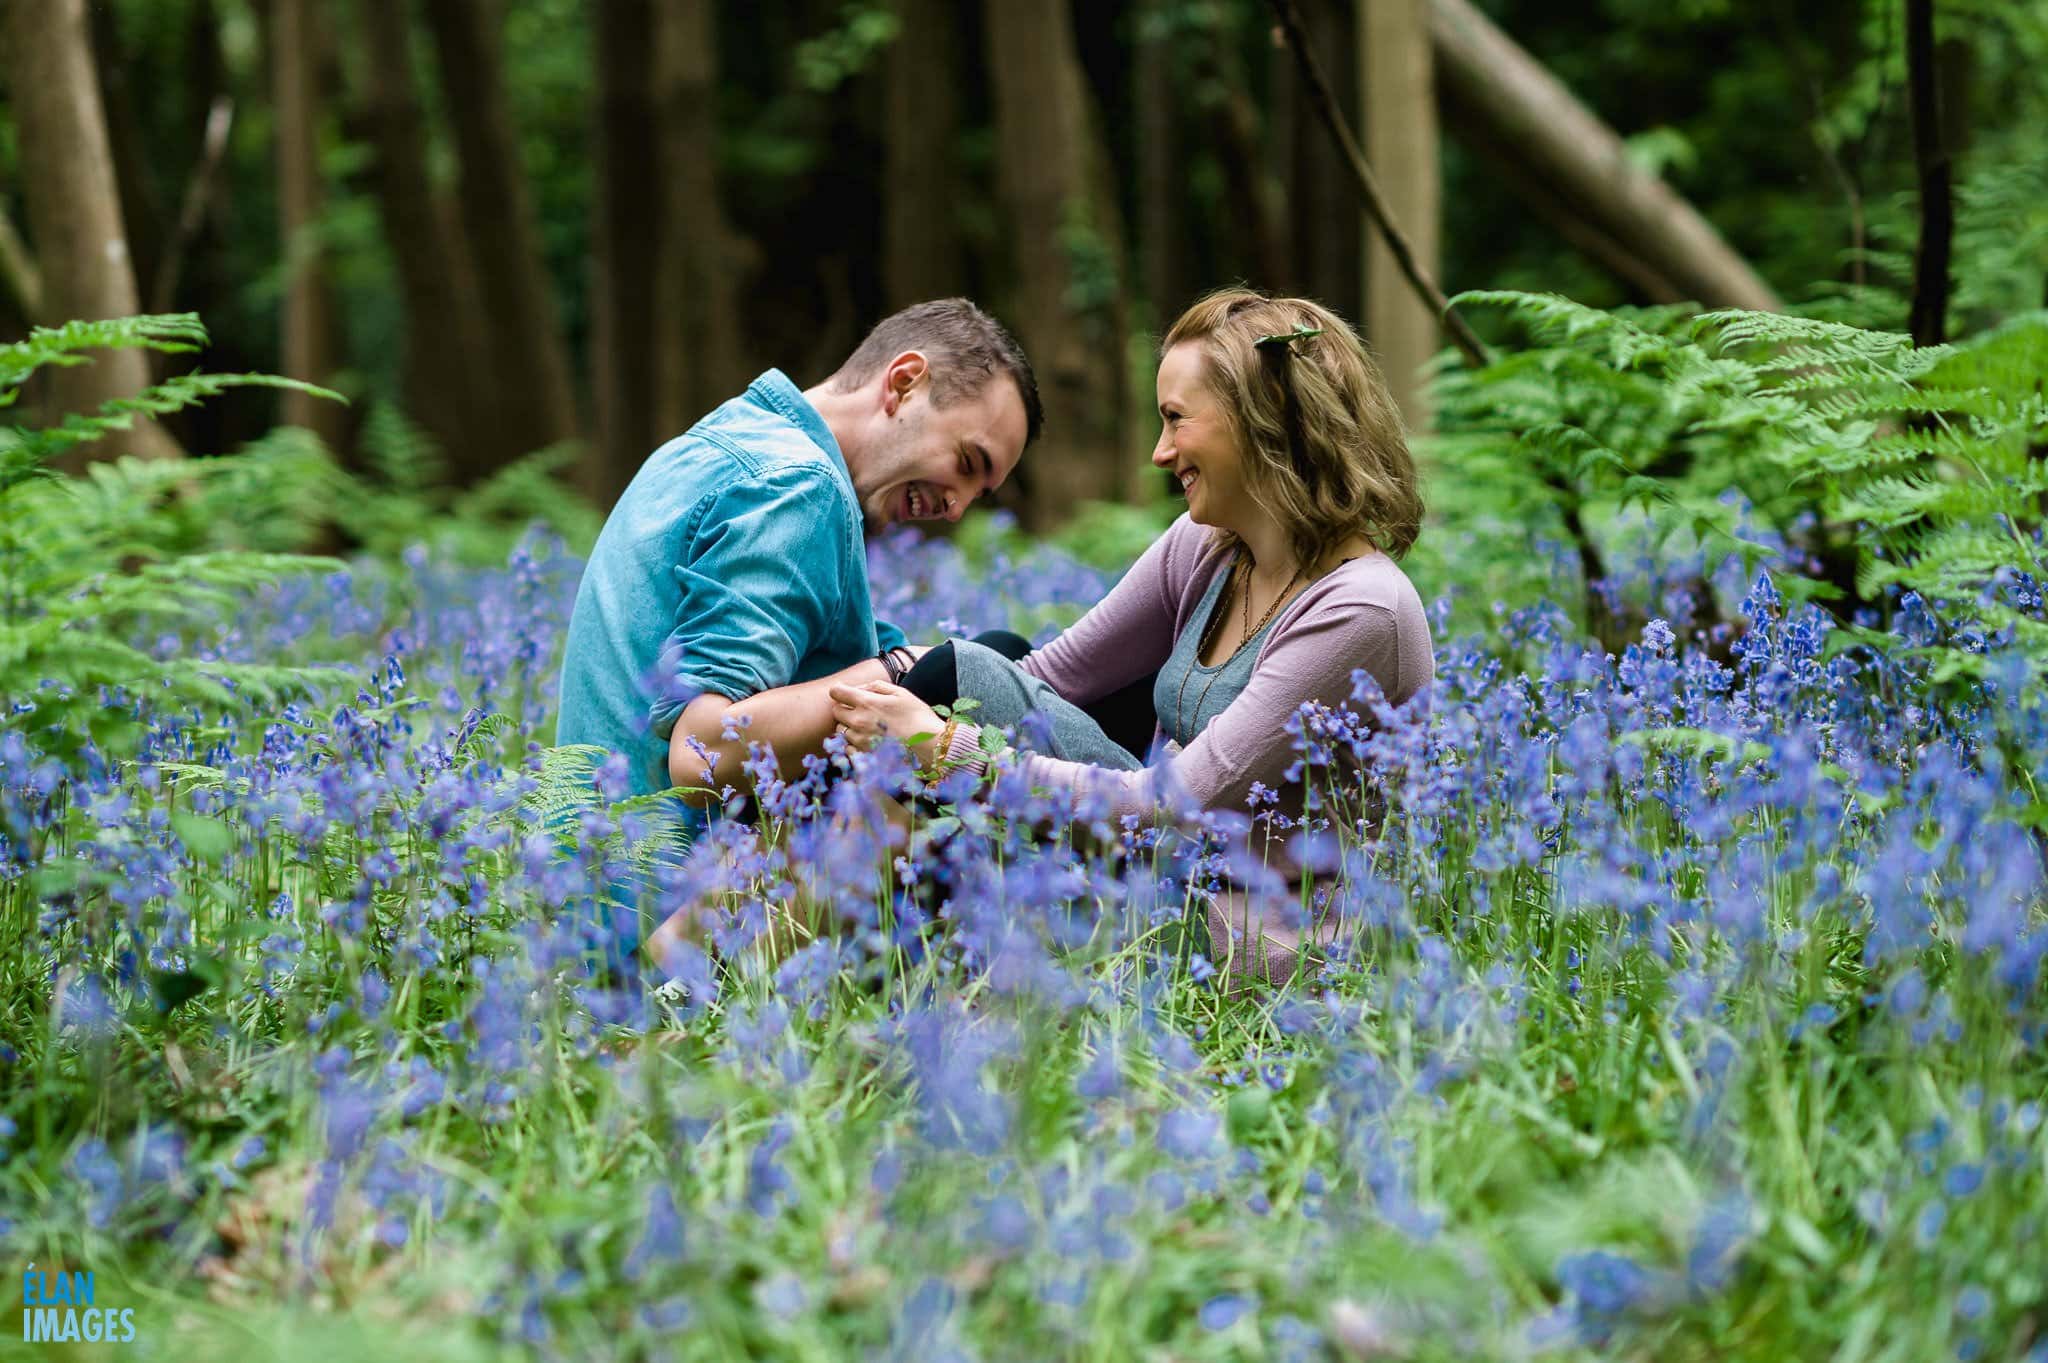 Engagement Photo Shoot in the Bluebell Woods near Bristol 12